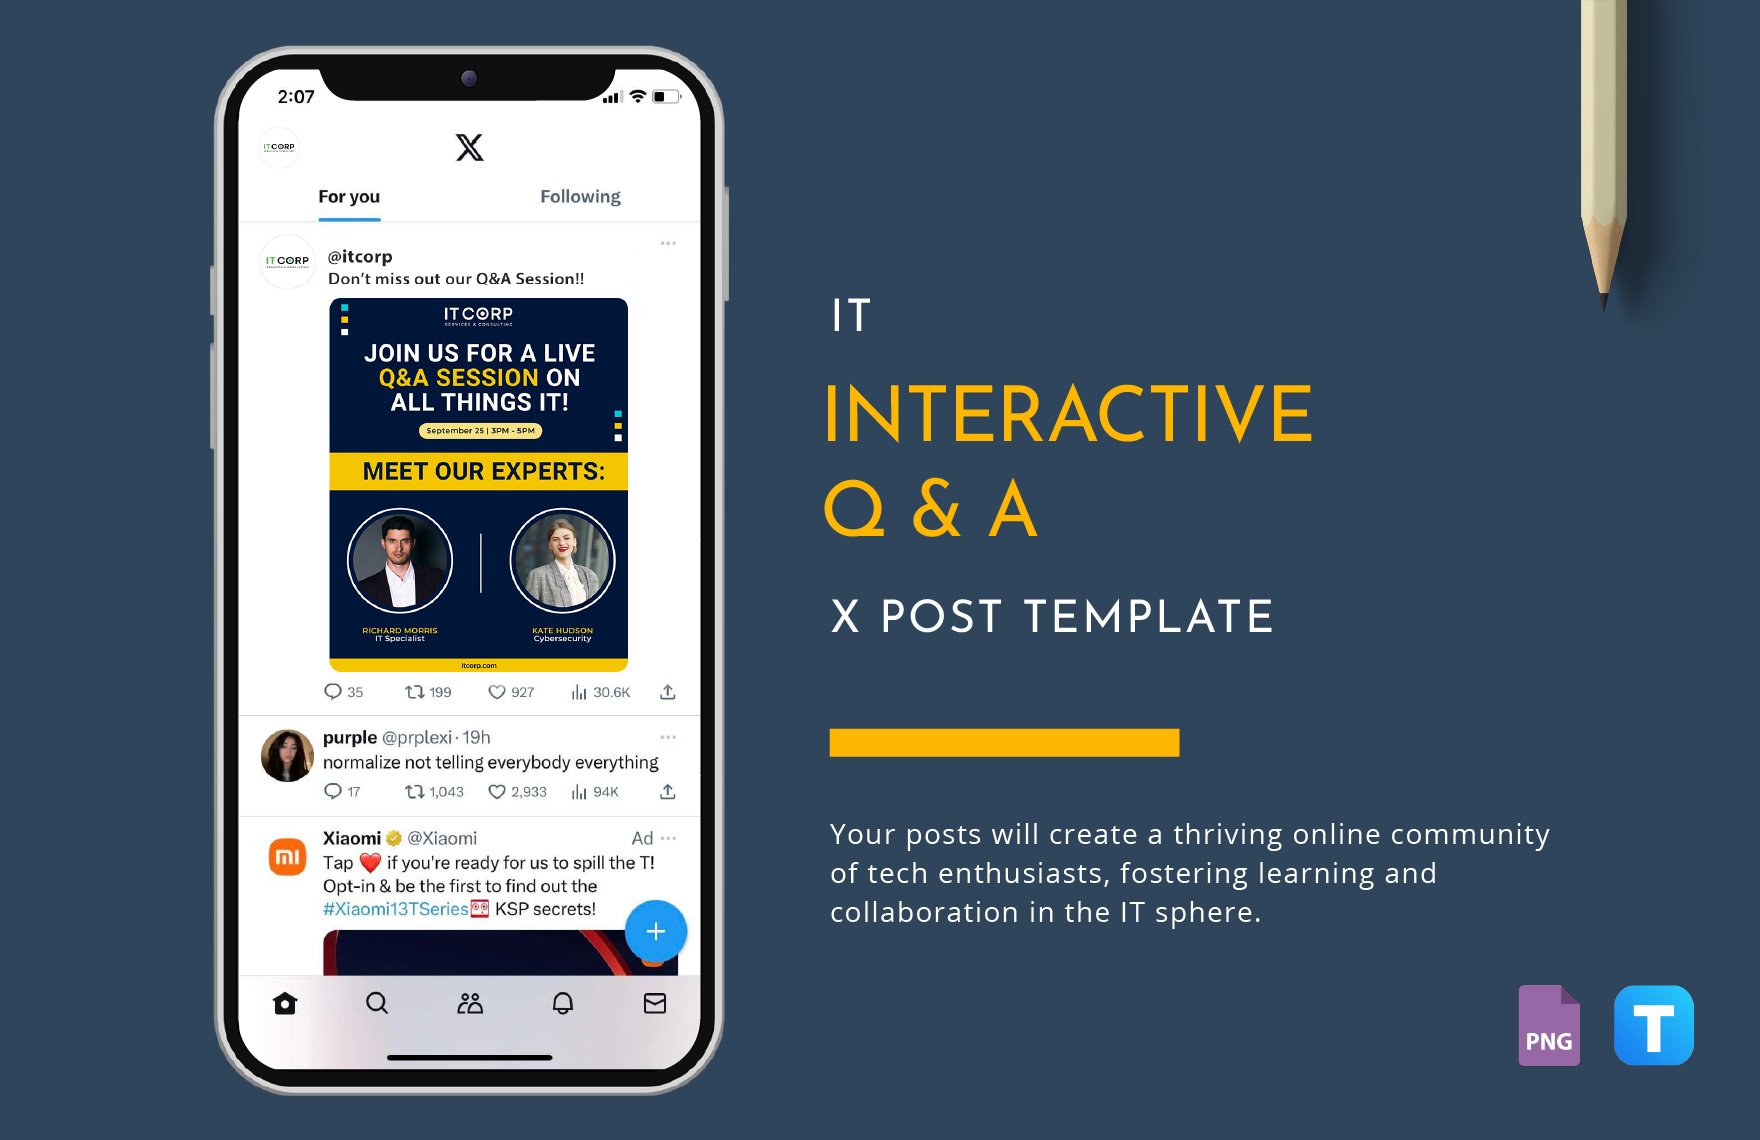 IT Interactive Q&A X Post Template